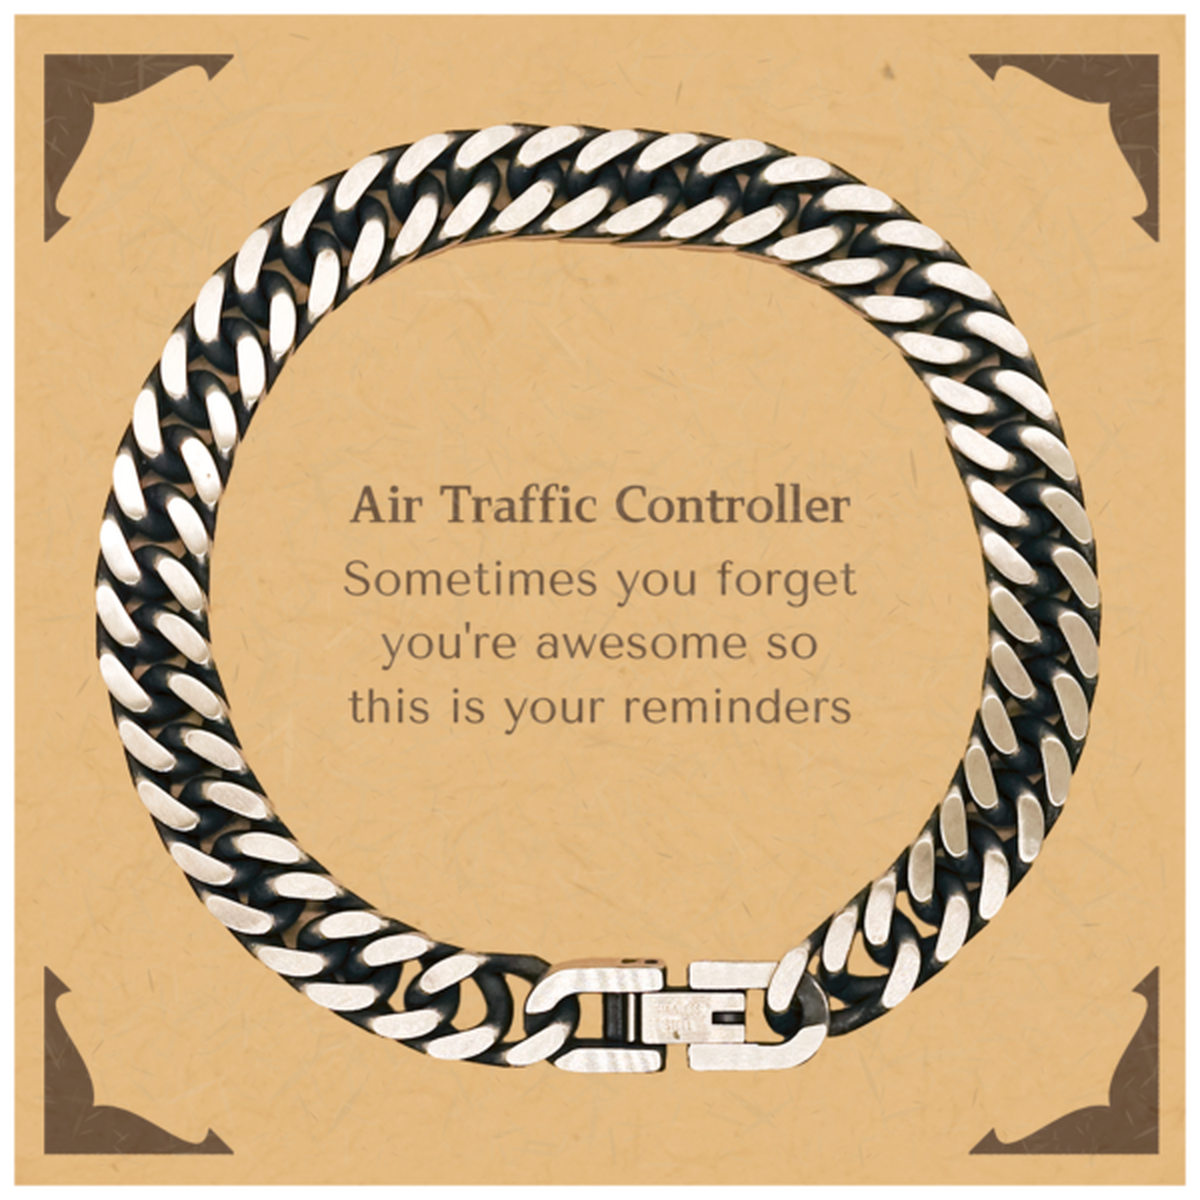 Sentimental Air Traffic Controller Cuban Link Chain Bracelet, Air Traffic Controller Sometimes you forget you're awesome so this is your reminders, Graduation Christmas Birthday Gifts for Air Traffic Controller, Men, Women, Coworkers